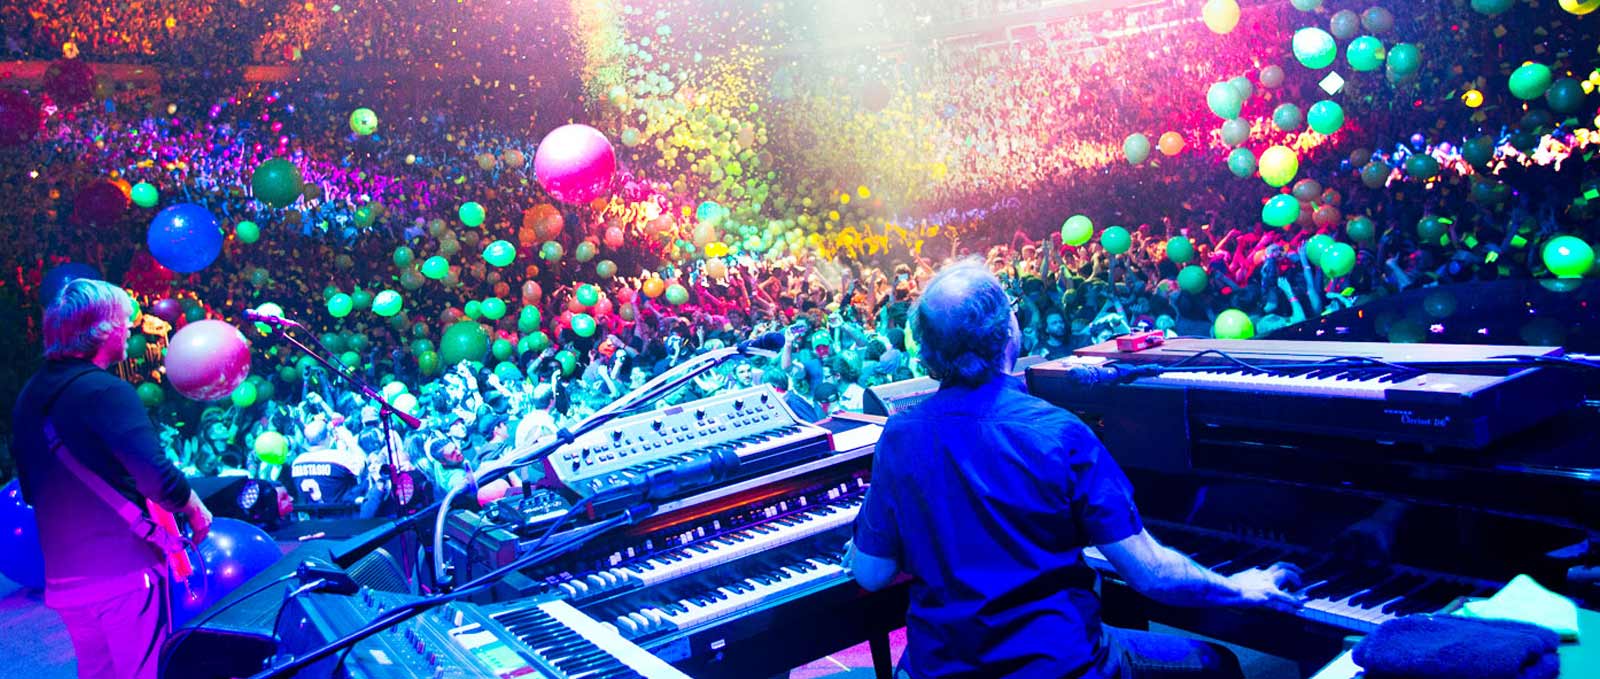 Phish Events, Twitter Ranked By Importance